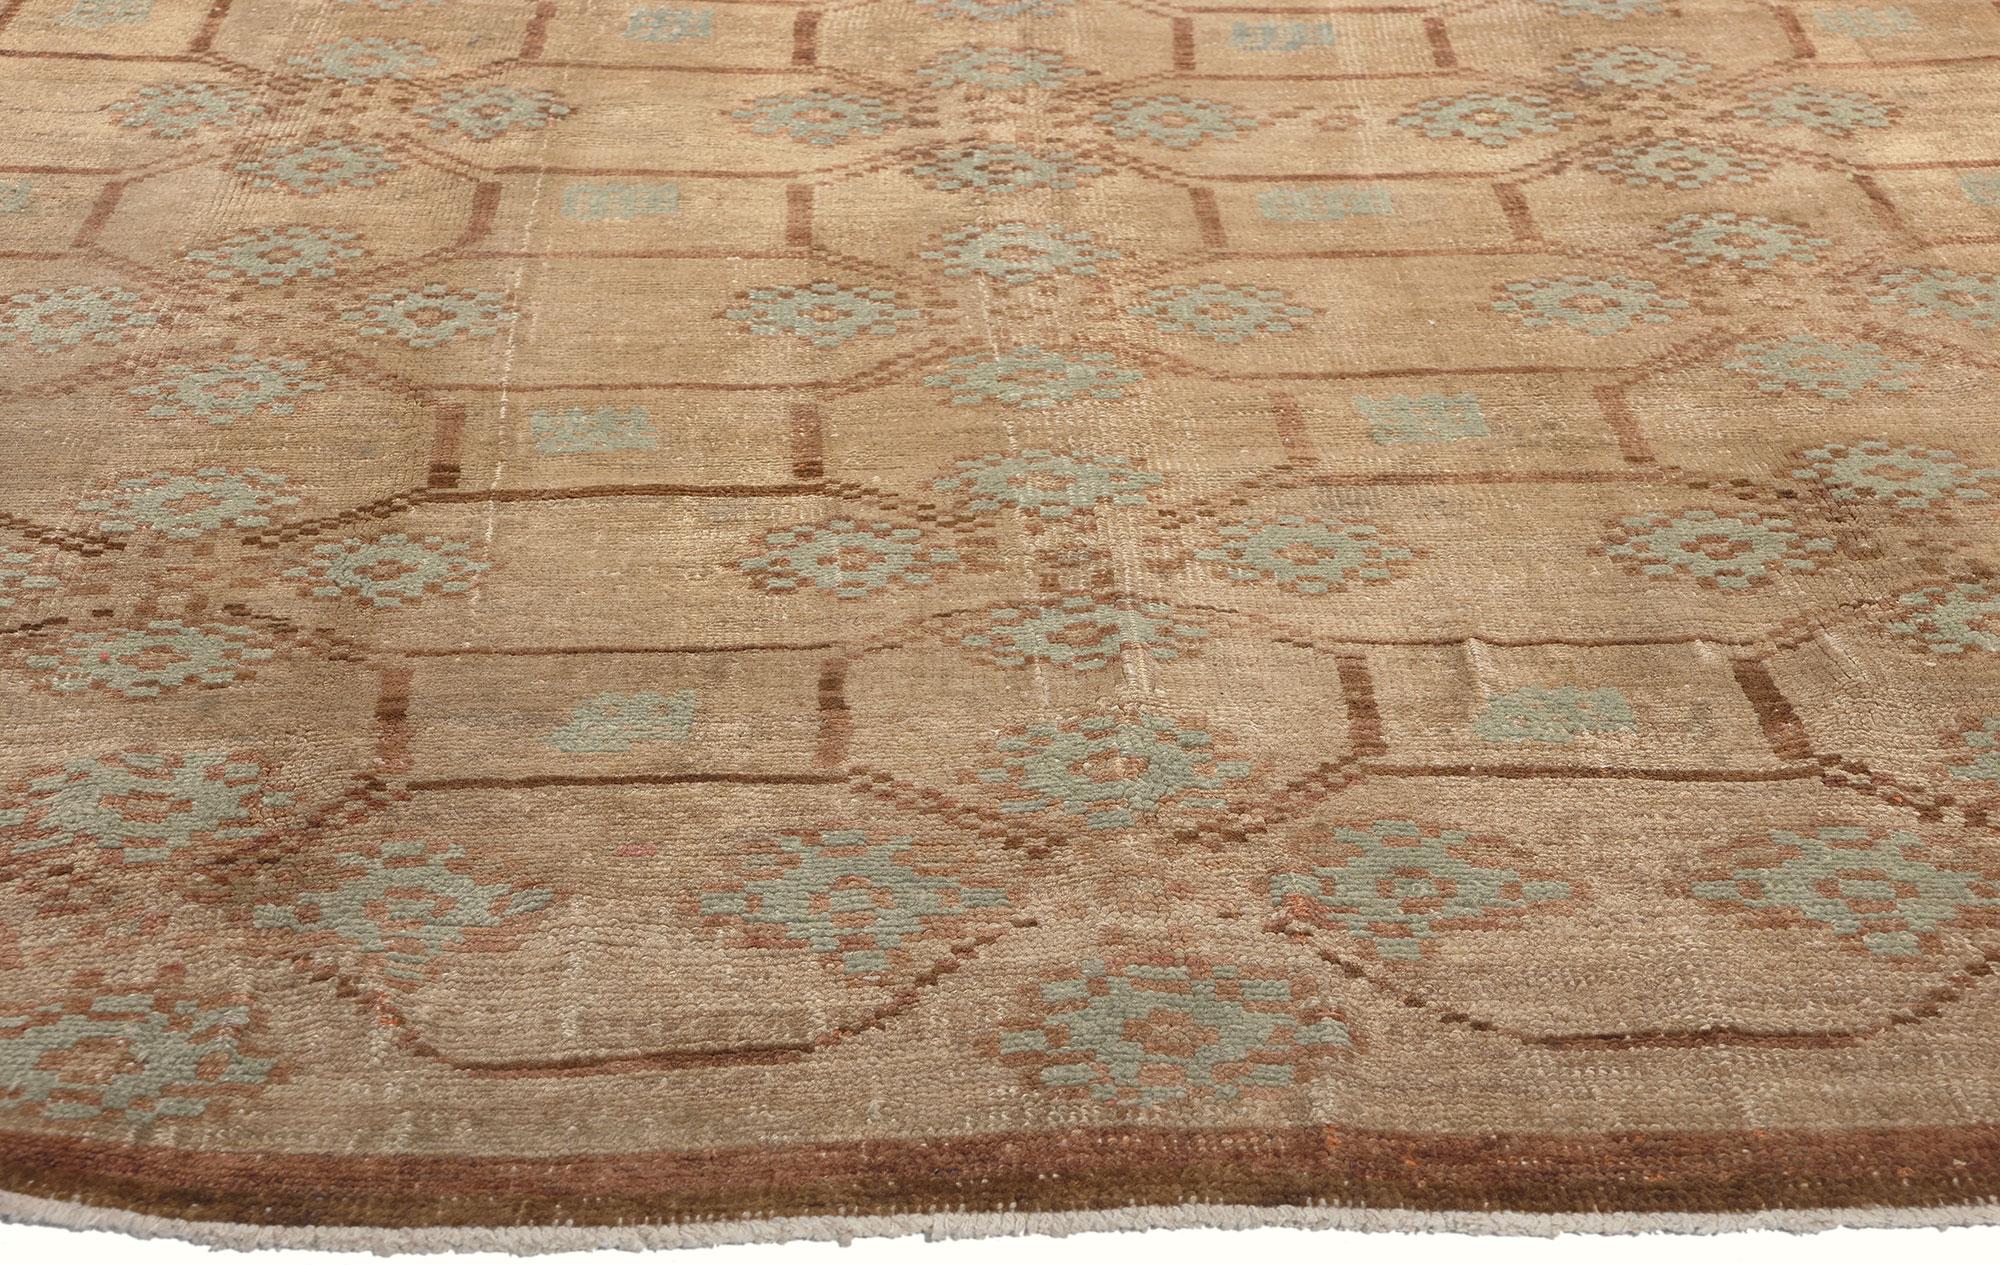 Vintage Turkish Oushak Rug, Organic Modern Meets Biophilic Design In Good Condition For Sale In Dallas, TX